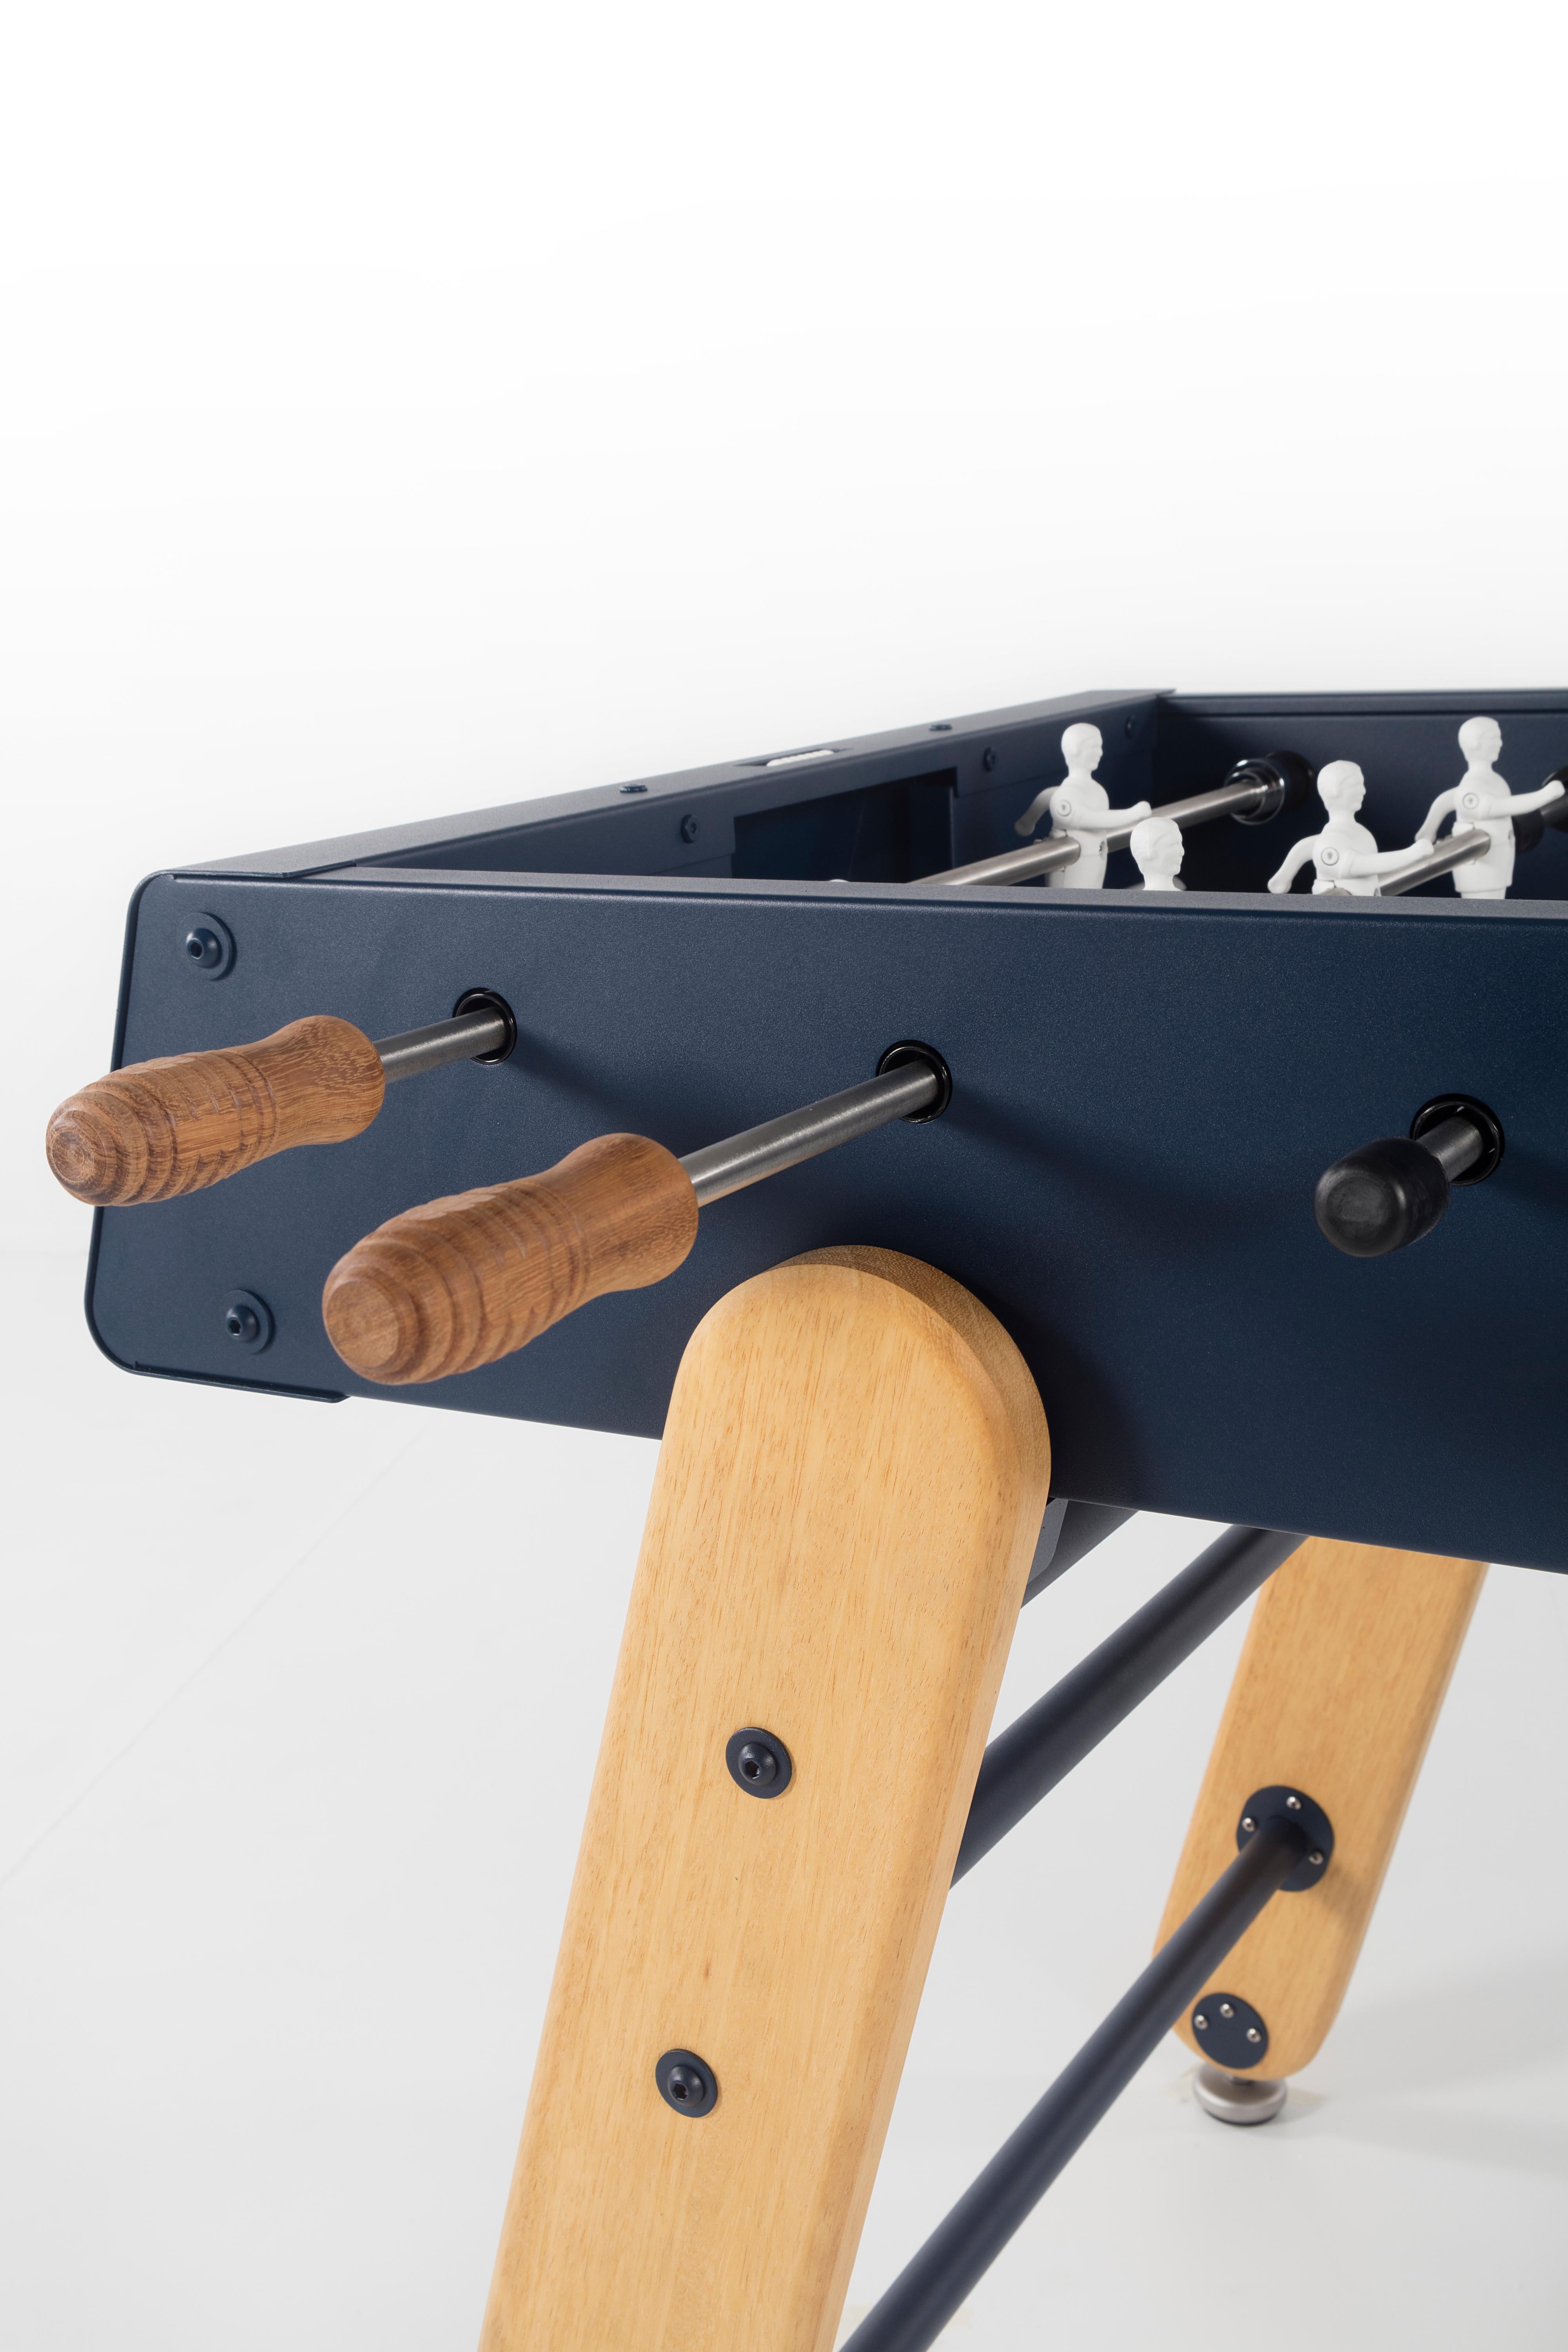 RS Barcelona RS4 Home Foosball Table in Blue In New Condition For Sale In Edison, NJ